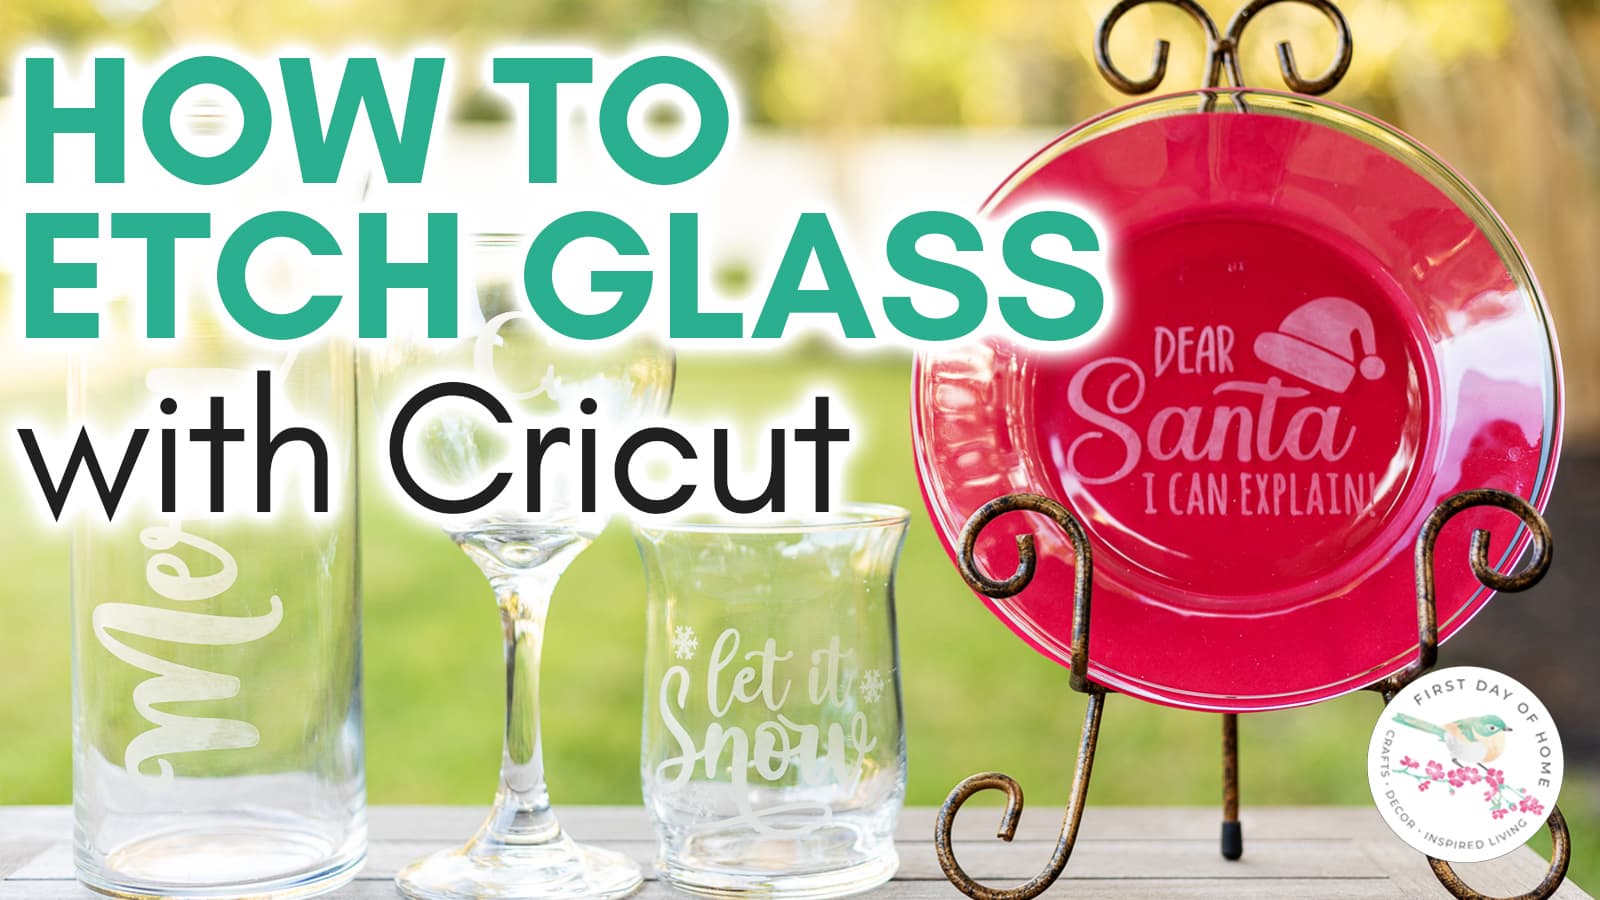 Image of glass dishes with glass etching. Text overlay reads "How to Etch Glass with Cricut"